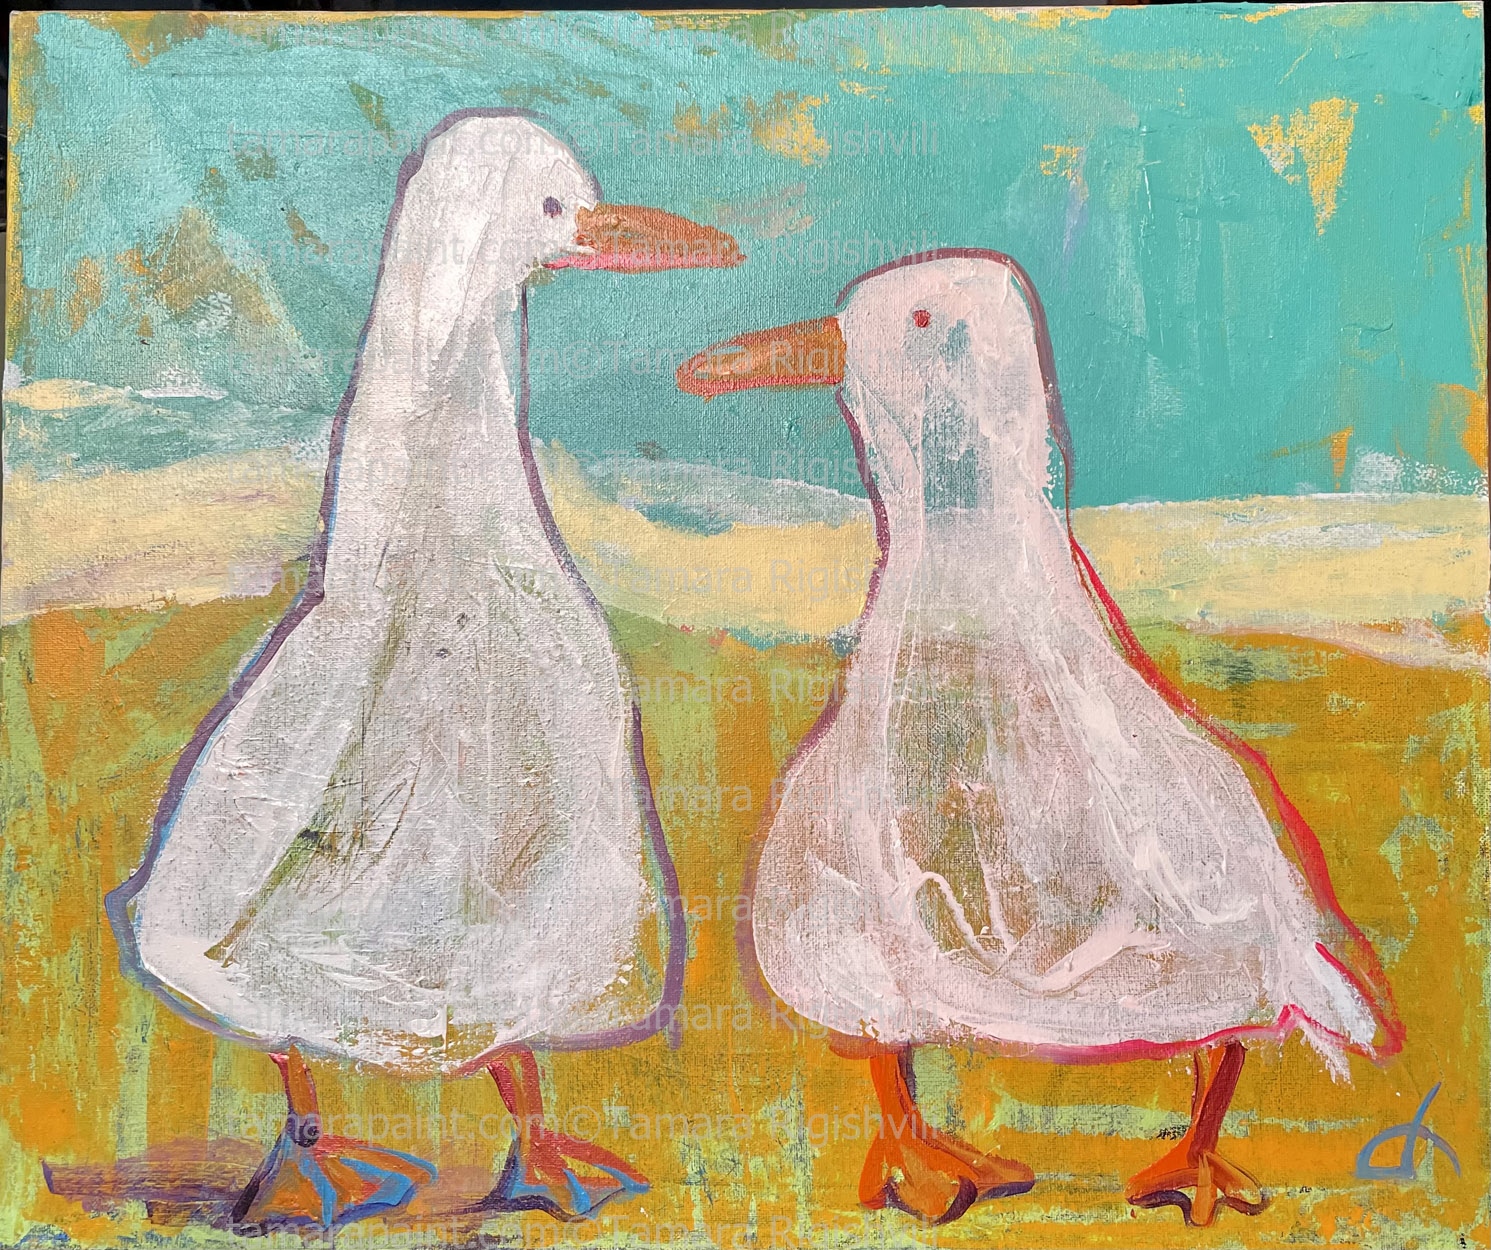  Global warming is the unusually rapid increase in Earth's average surface temperature over the past century primarily due to the greenhouse effect, so this two poor little friend Ducks are nervous about upcoming climate surprises, Artwork  by artist Tamara Rigishvili 